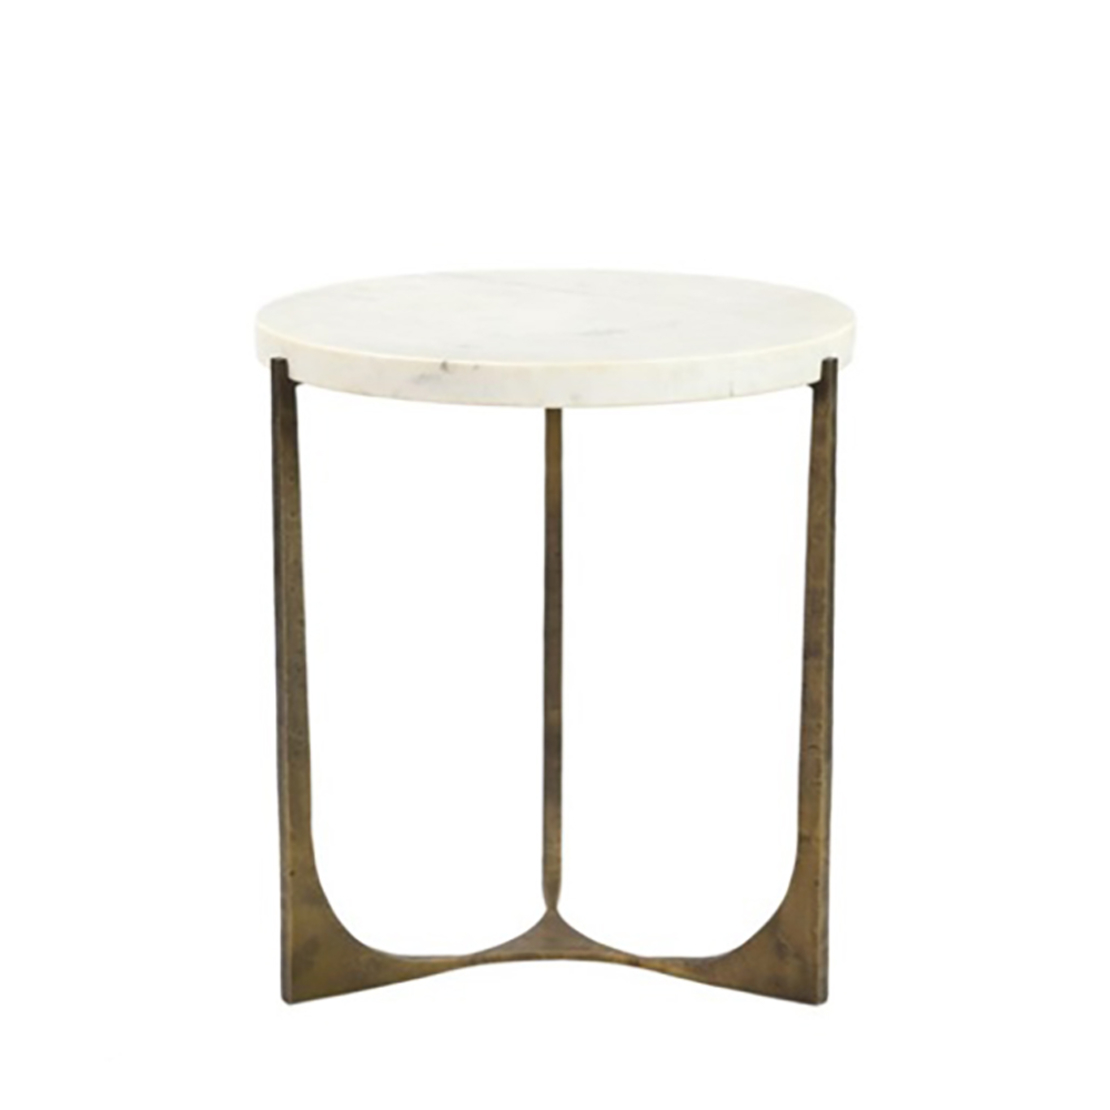 BLANCHE SIDE TABLE MARBLE WHITE METAL BRASS ANTIQUE D55xH61cm IN